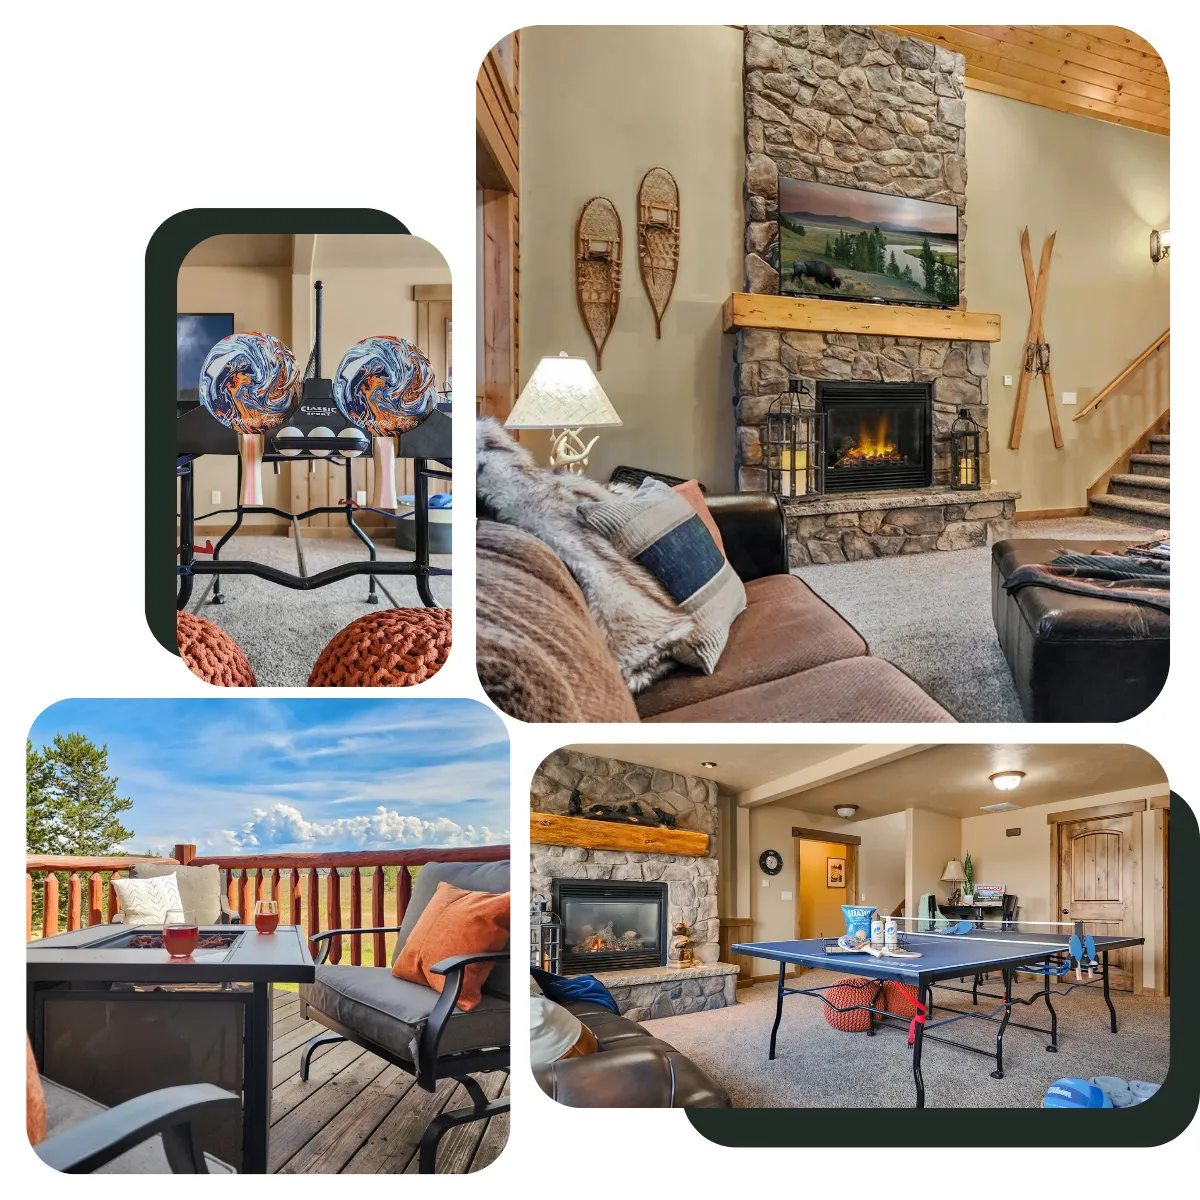 Experience the Wilderness Dreams: A gated community near Yellowstone, featuring stunning mountain views, lake access with boats, a 6-person hot tub, game room, and a modern kitchen.